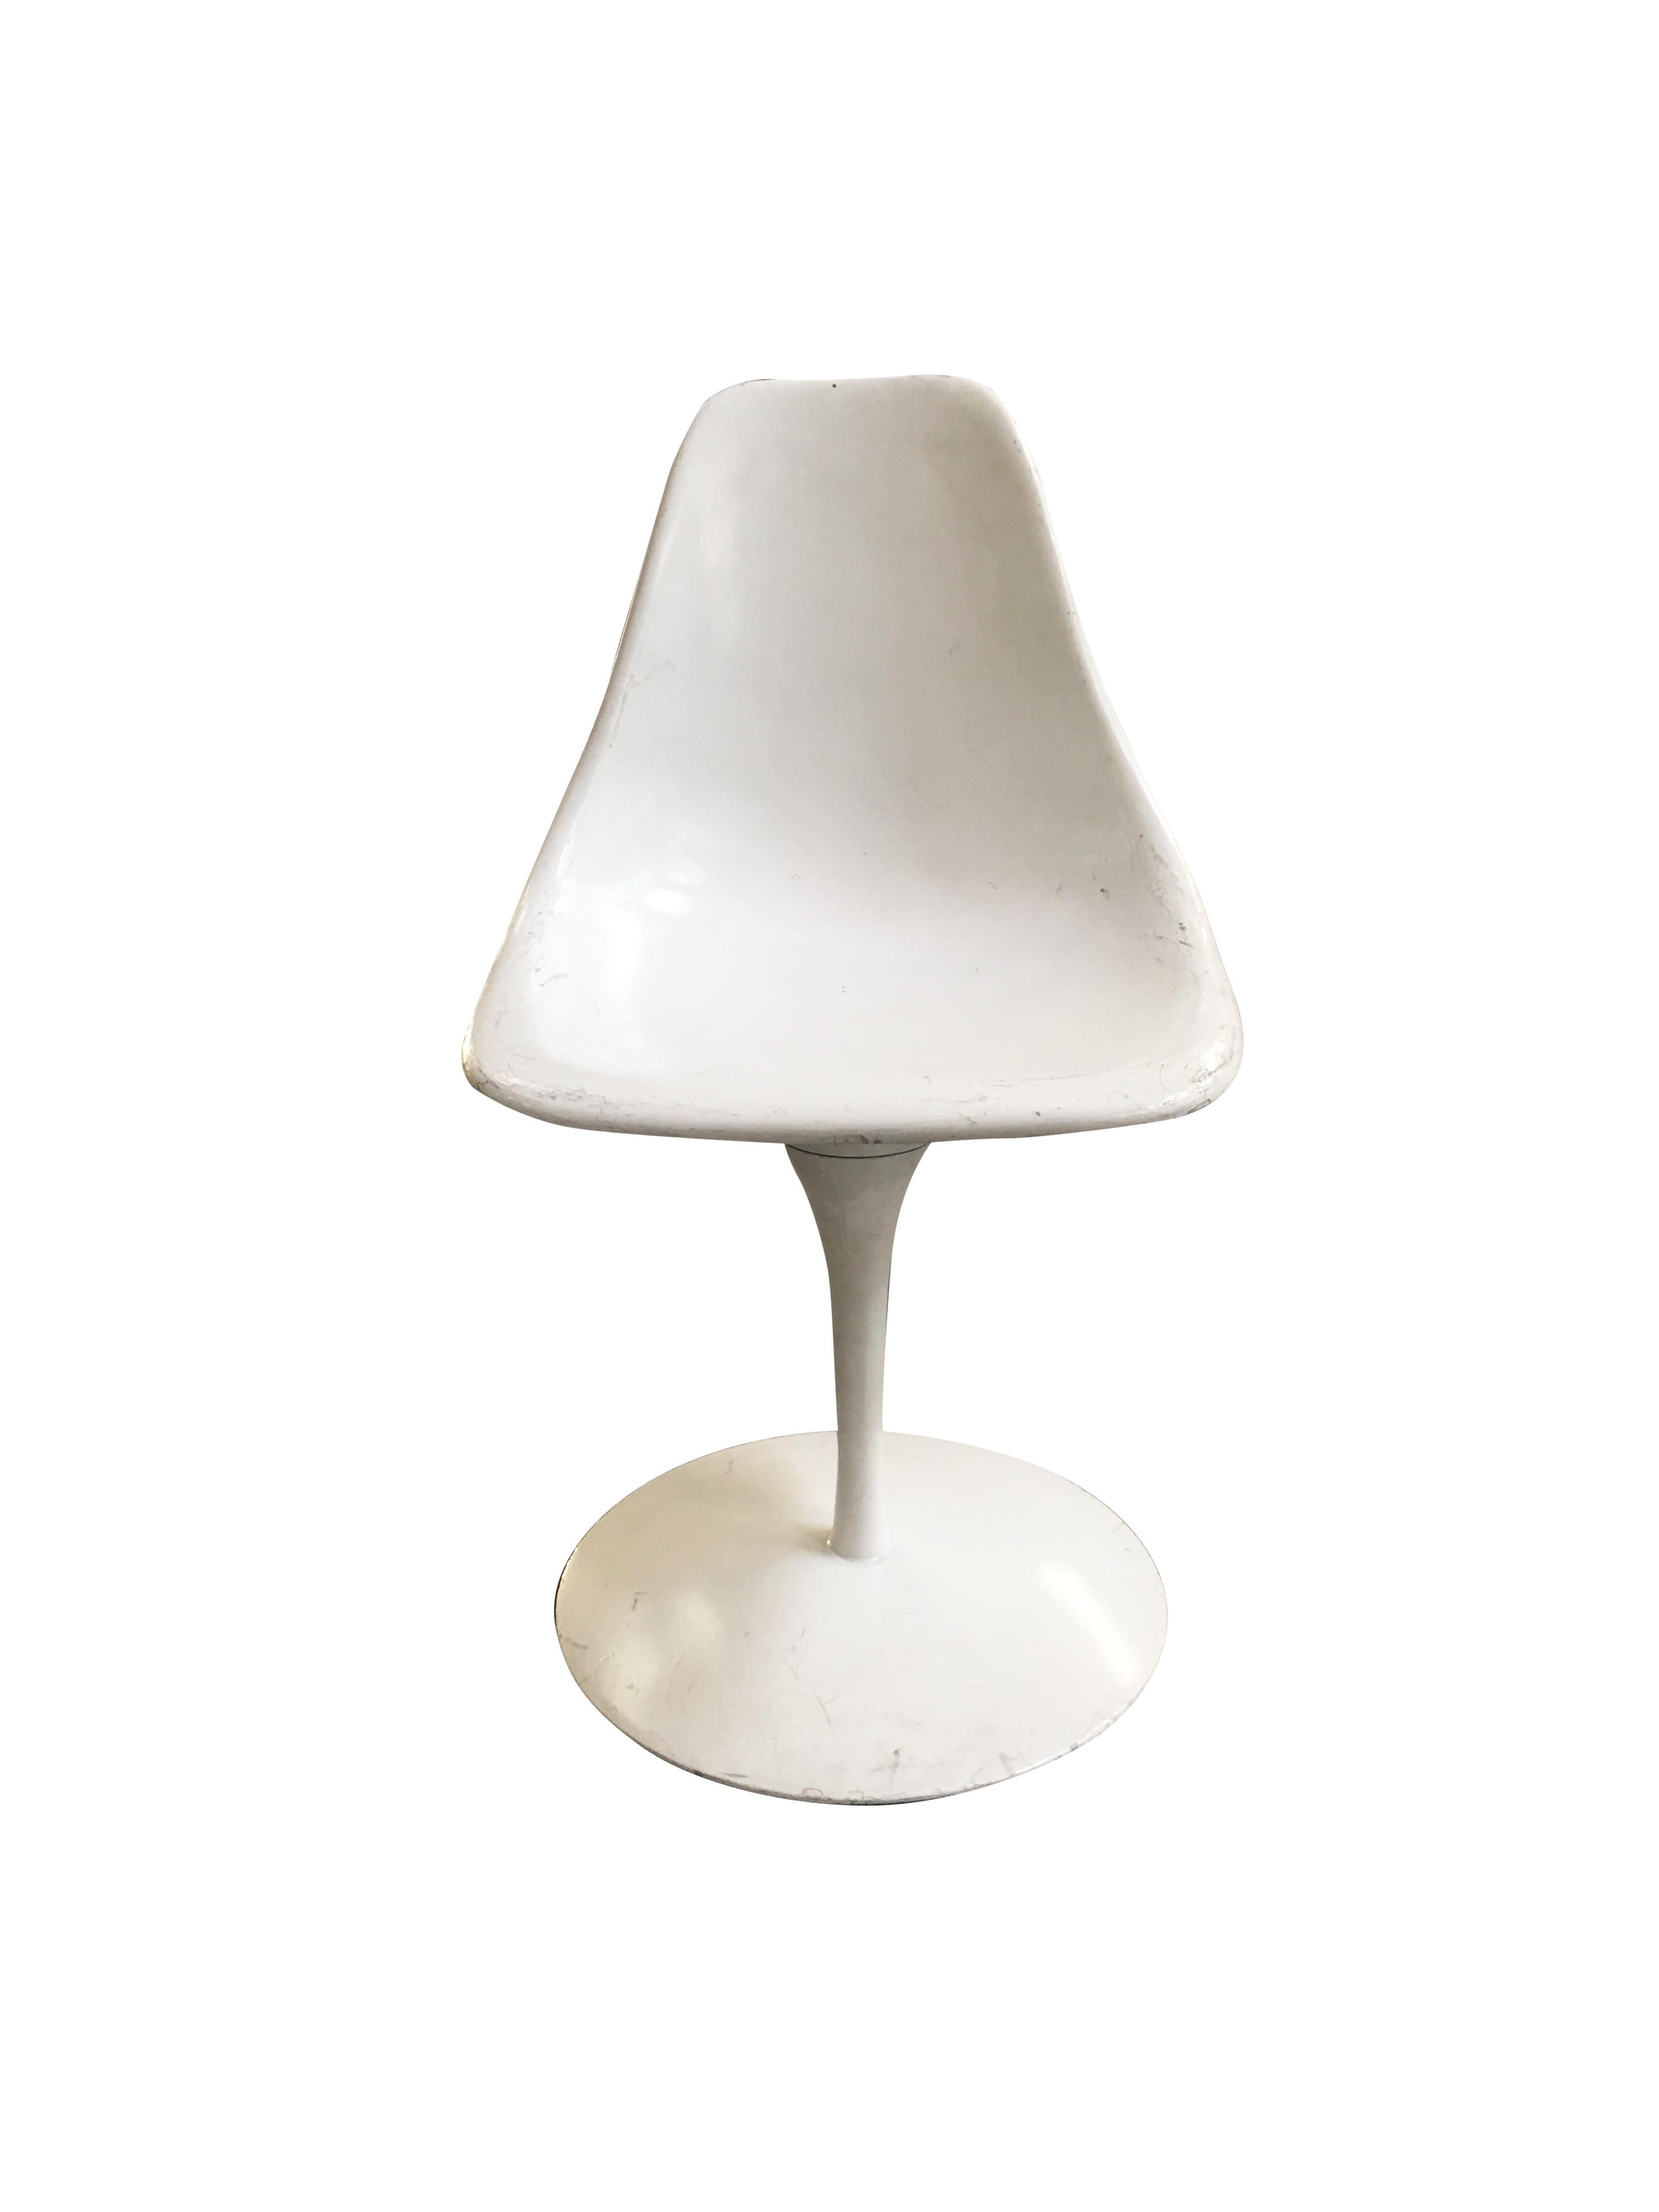 Modeled after Eero Saarinen's Tulip series, The Arkana shell chair was designed by Maurice Burke in 1965 for the Arkana company in England. It features the classic aluminum hourglass base and eggshell fiberglass seat that have remained a prime